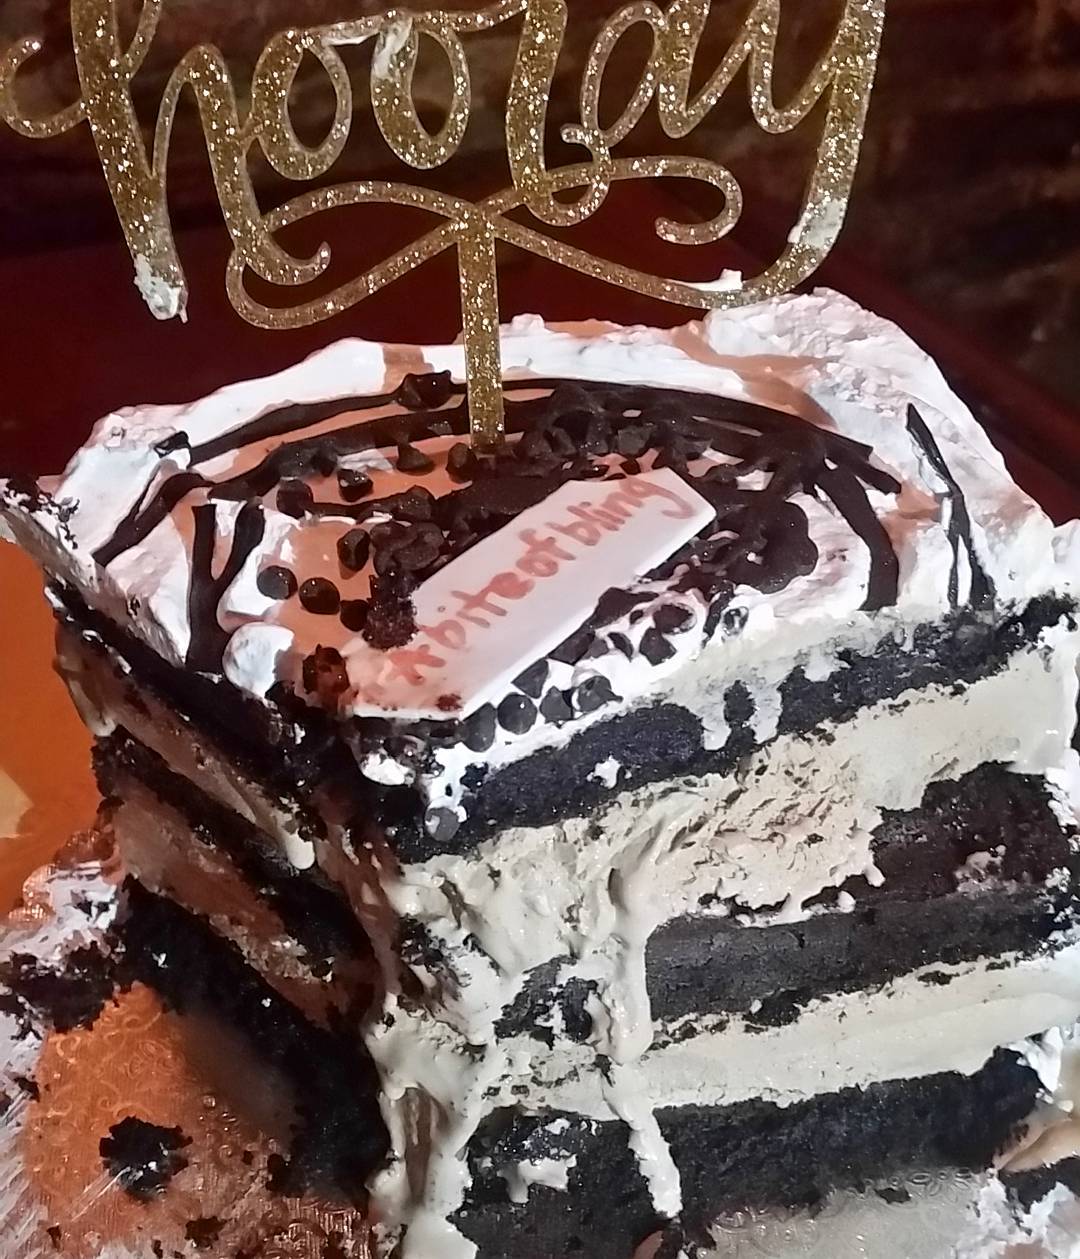 Hooray…..happy National Ice-cream day!!!
Here’s an up close and personal slice of Dark Chocolate Ice Cream Cake from @tipsyscoop  It features their DarkChocolate Whisky SaltedCaramel IceCream, Chocolate Cake & Meringue topped with Chocolate & Caramel drizzle suggests you get